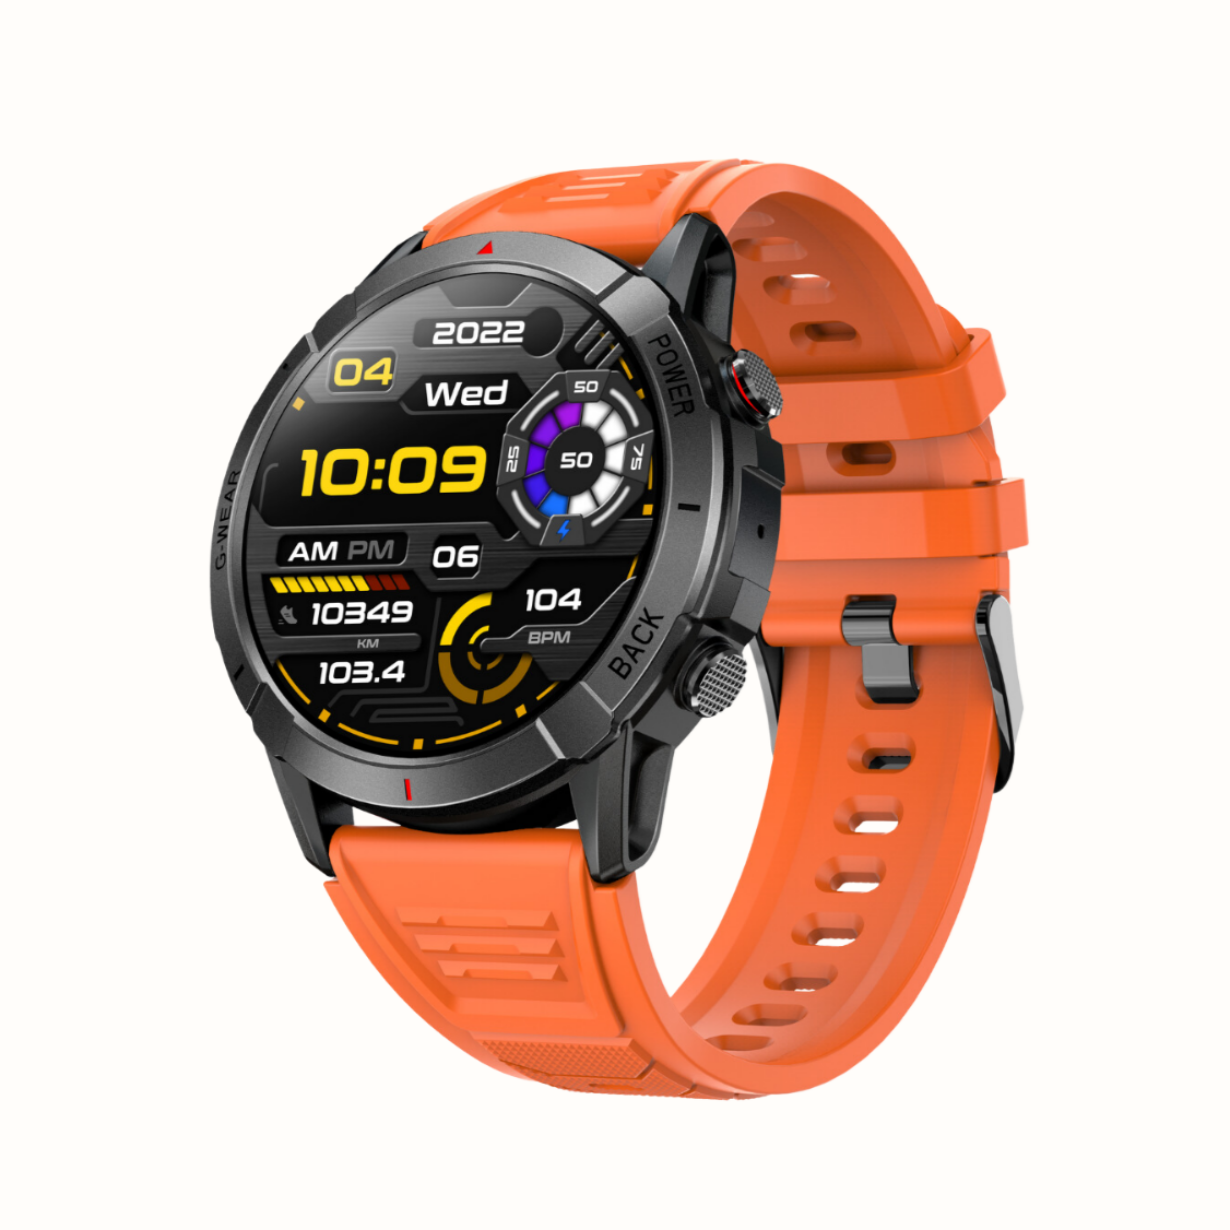 NX10 Sport Smartwatch, AMOLED Display, Setup with Android device, Setup with Apple Device, Water resistance - IP68, Best Smart Watch, 2023, Track Activity,Track WOmens Health, Pedometer, Calorie Monitor, Sleep Tracking, Heart Rate Monitor, Blood Oxygen Monitor- Spo2, Multisport Mode, Color - Orange